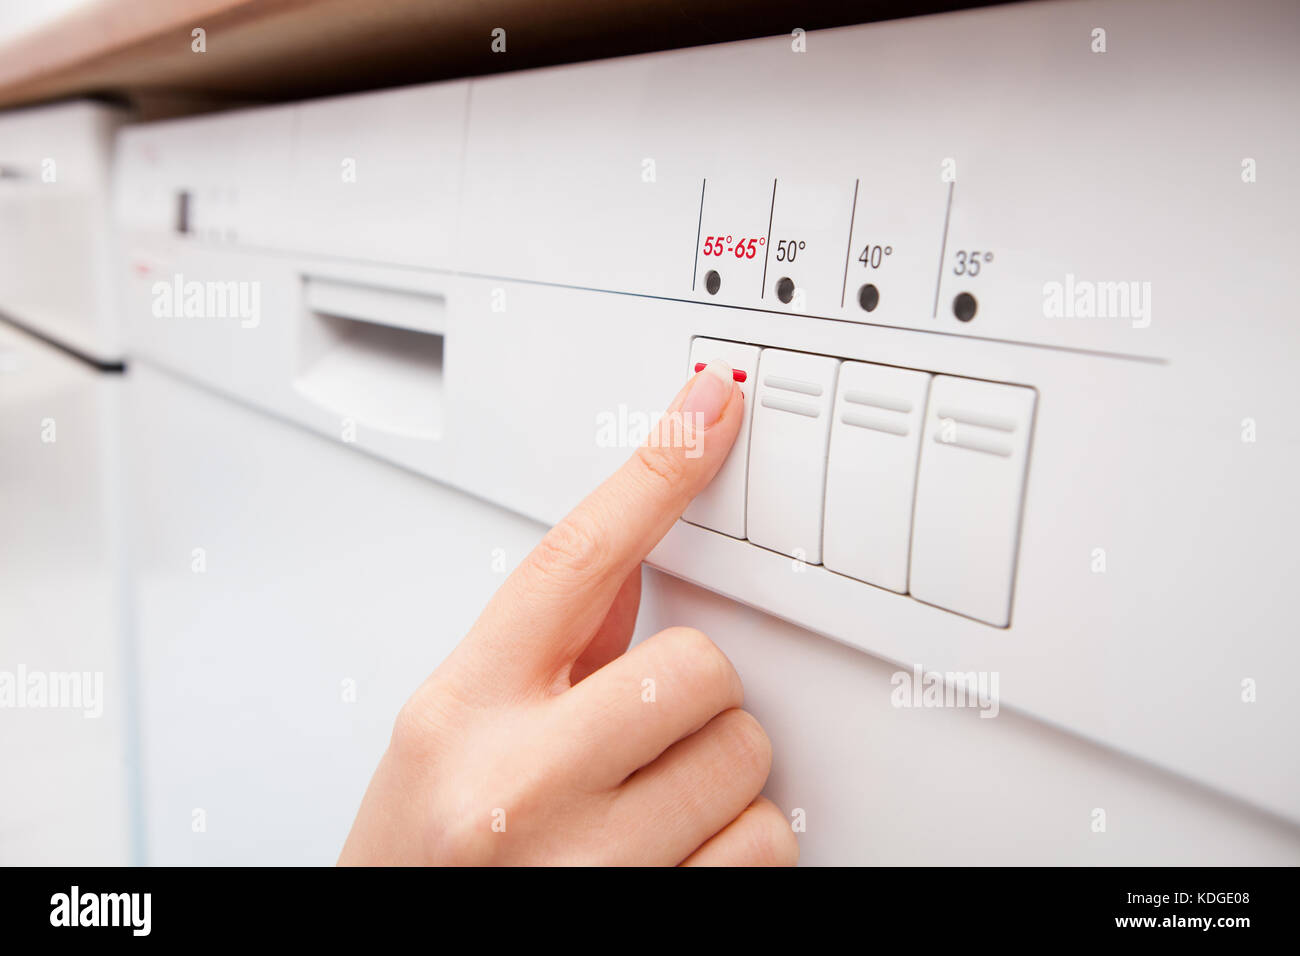 Close-up Of Woman's Finger Pressing Button Of Dishwasher Stock Photo